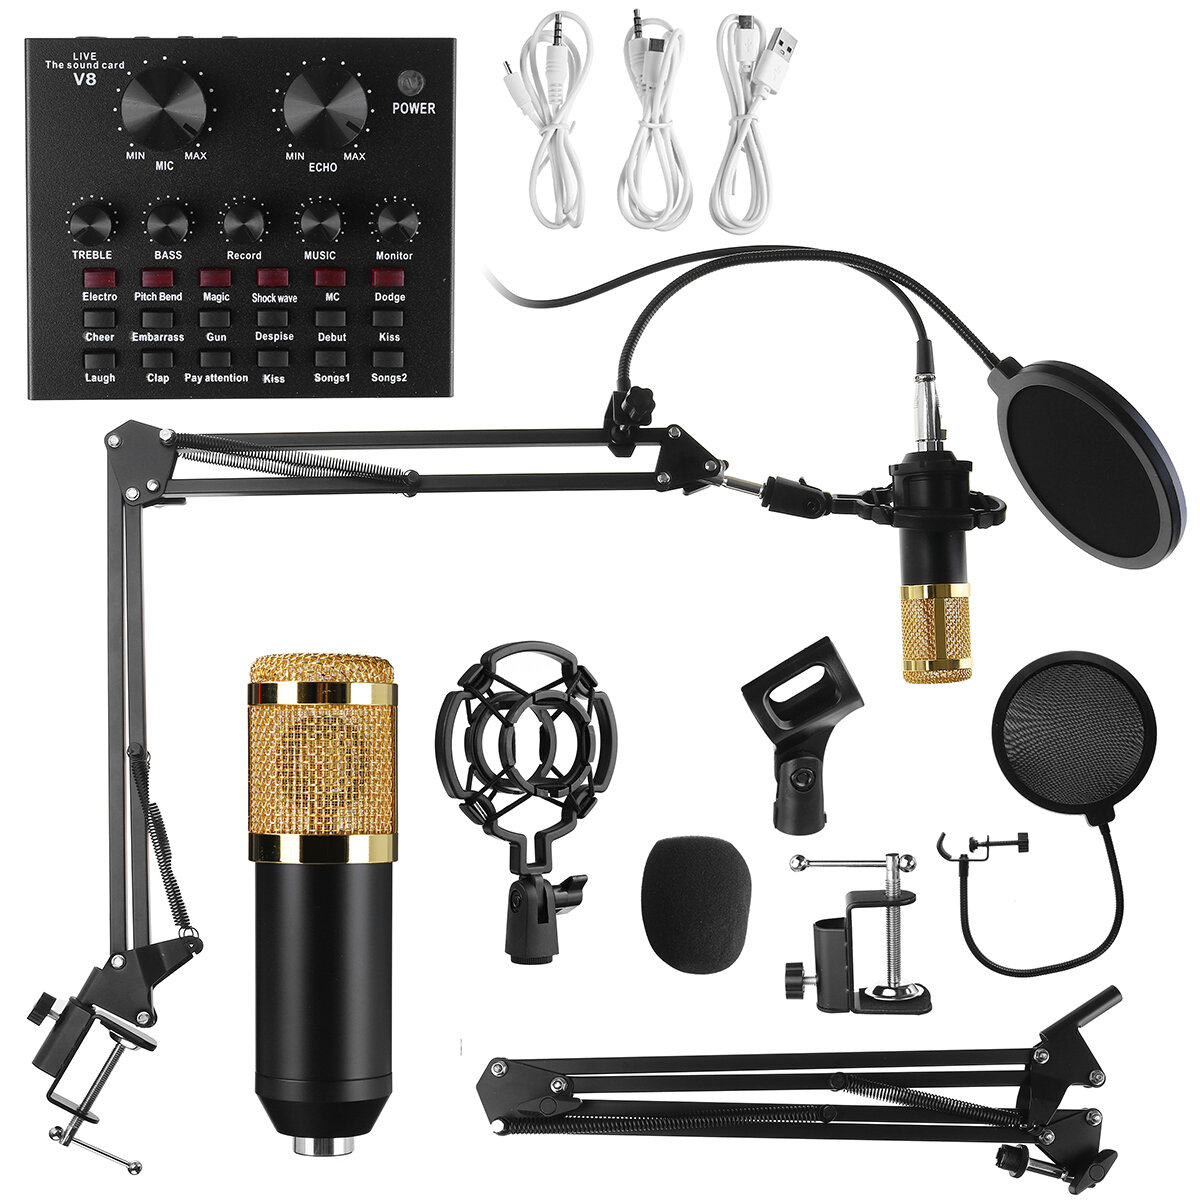 

Bakeey 9in1 Condenser Microphone Kit Live Sound Card Microphone Stand Shock Mount Professional Mic Set for Broadcast Sin